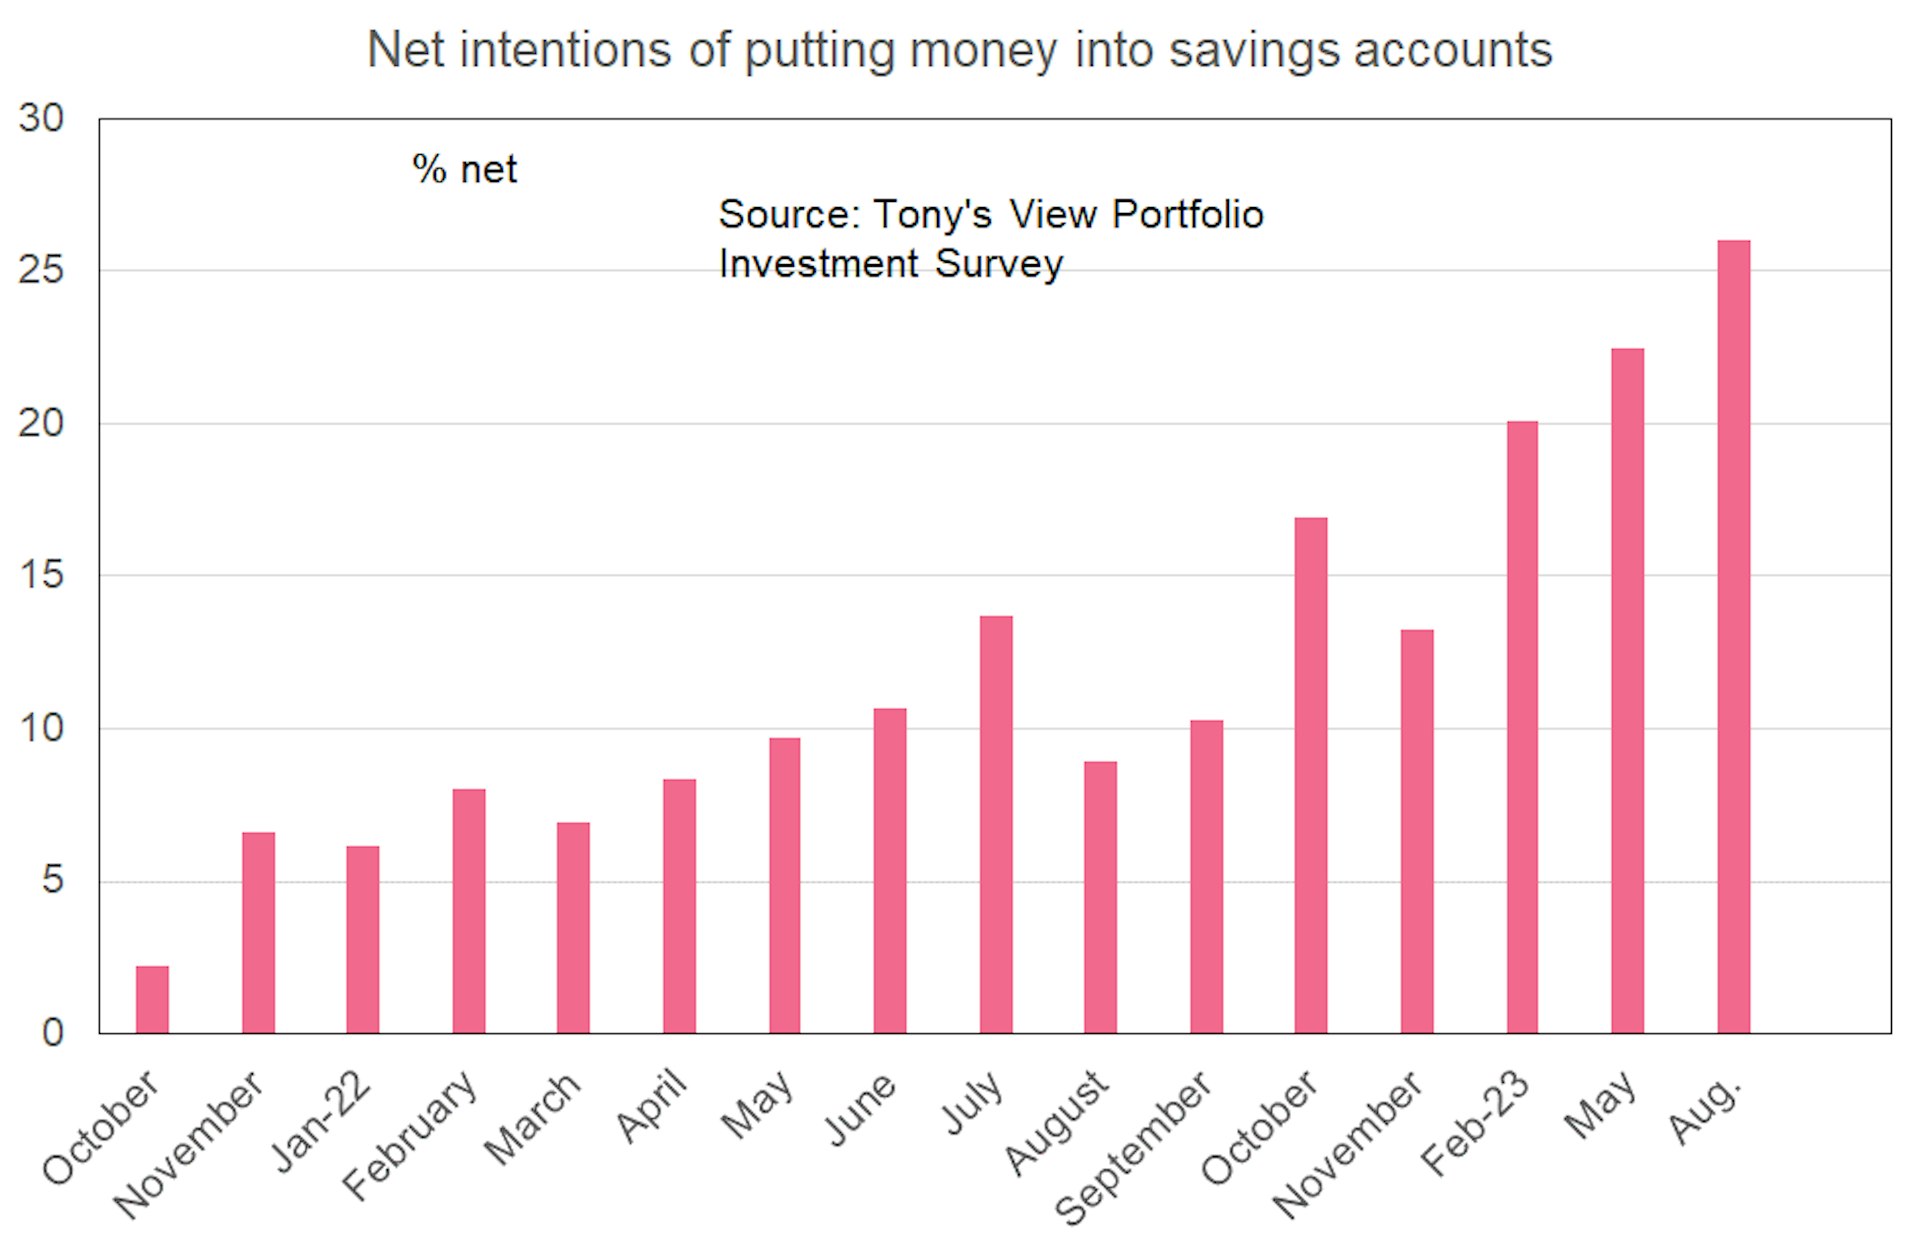 A bar graph shows survey respondents' intention to put money in a savings account. We see that over the past year (bar November 2022), intentions have been trending upward fairly steeply. 